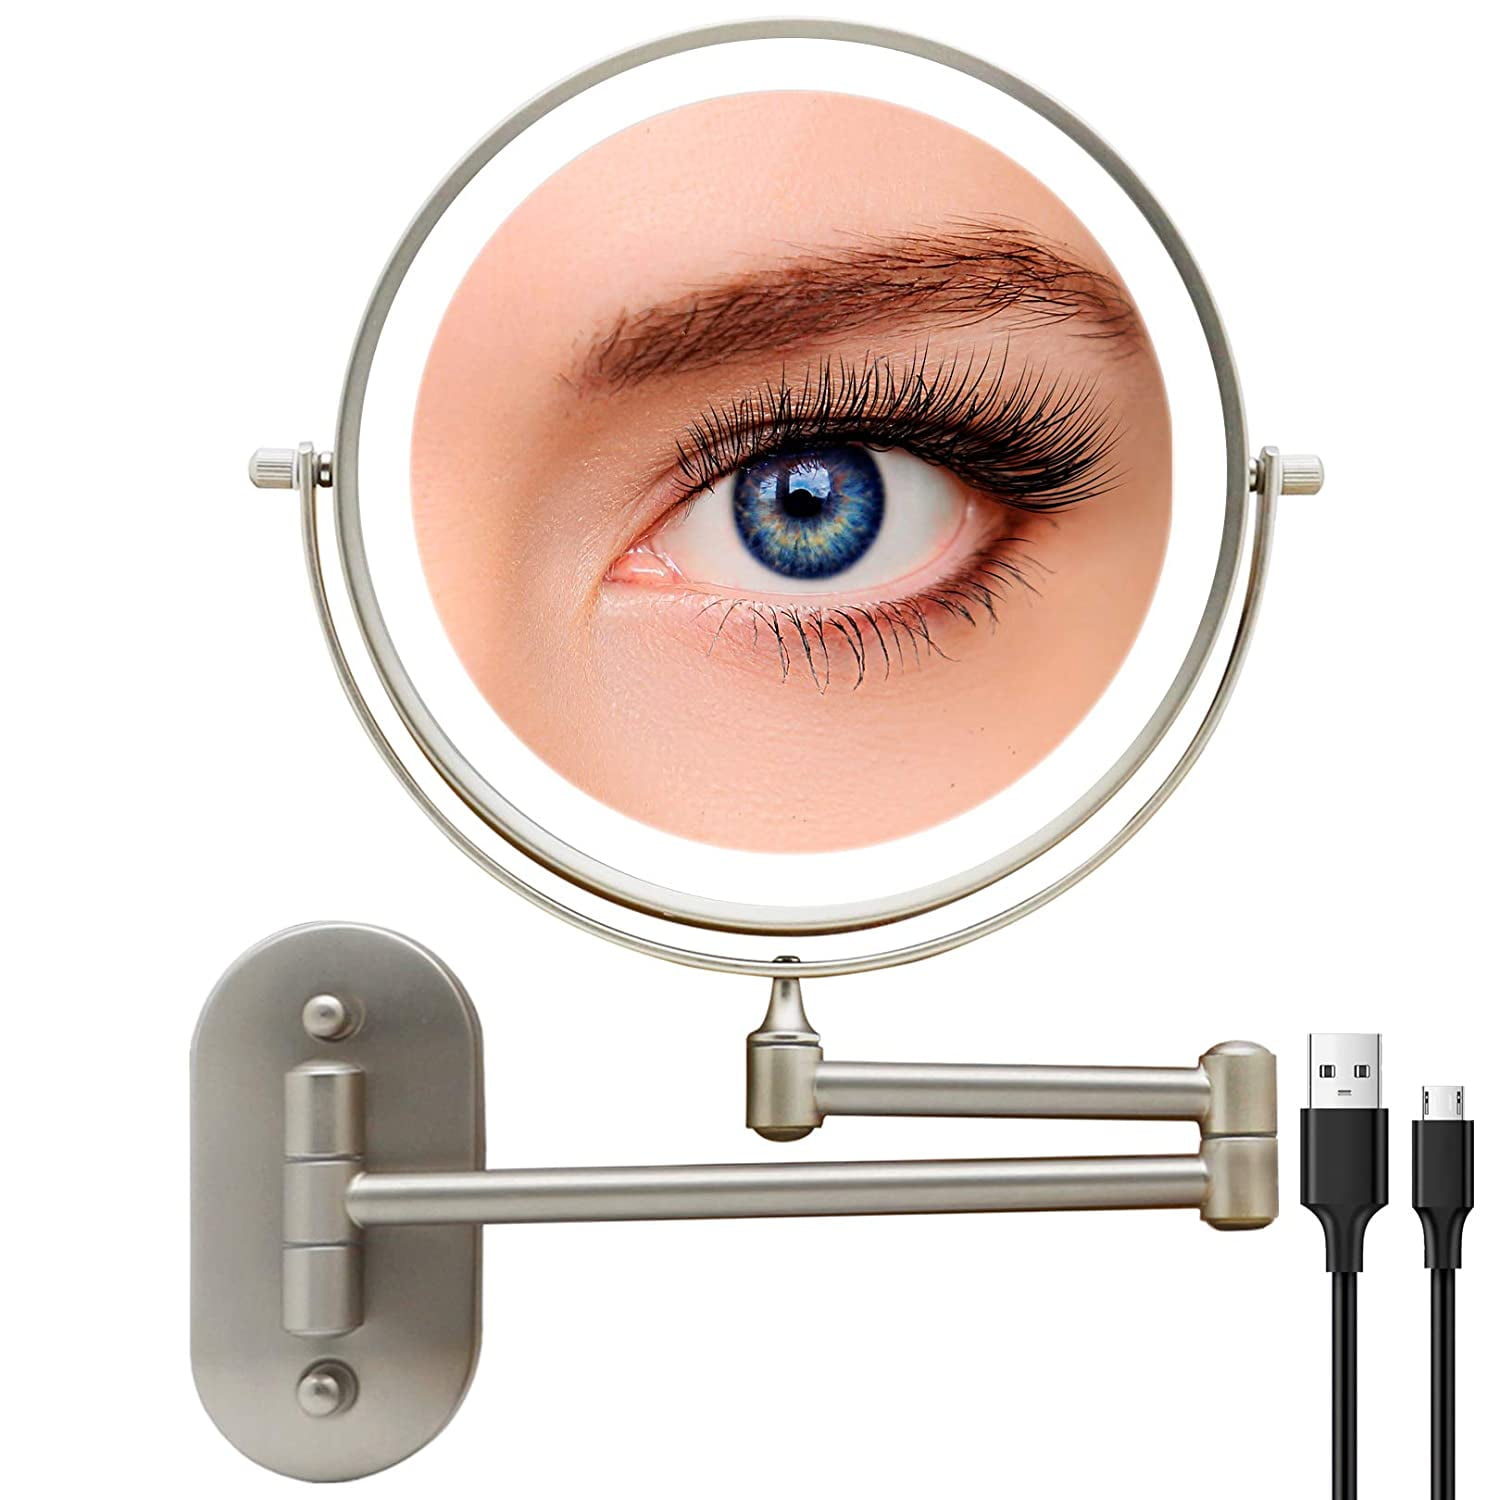 Koimg Bathroom Mirrors Wall Mounted 7x Magnification,double-sided Makeup Mirrors Magnifying Shaving Mirrors Free Standing,extendable And Chrome Finished For Home,spa And Hotel,anti-fog,3X,6inches 